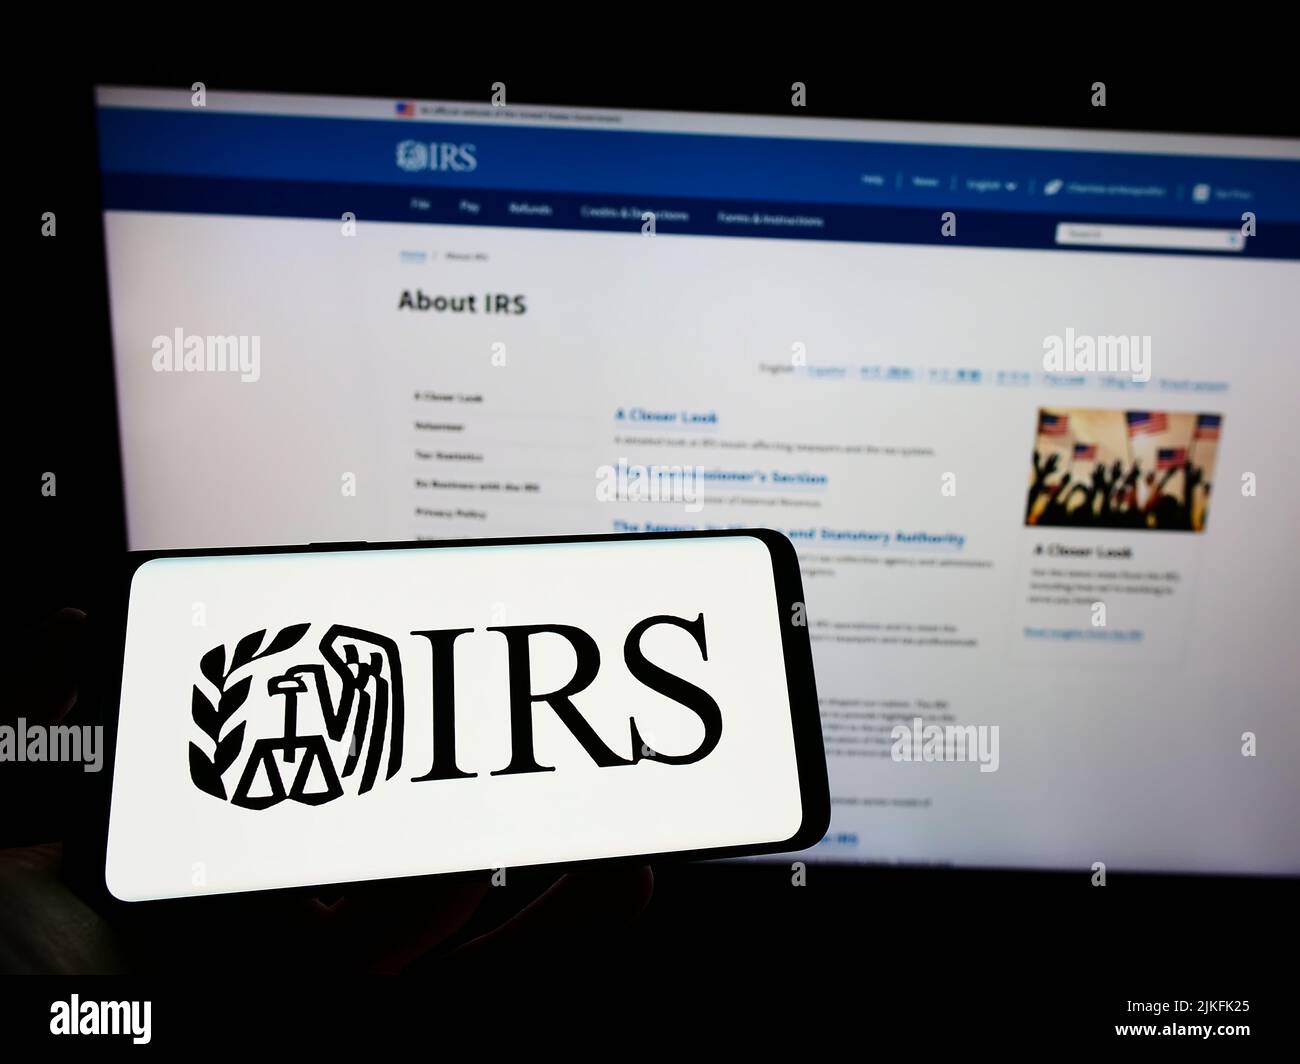 Person holding mobile phone with logo of US Internal Revenue Service (IRS) on screen in front of web page. Focus on phone display. Stock Photo